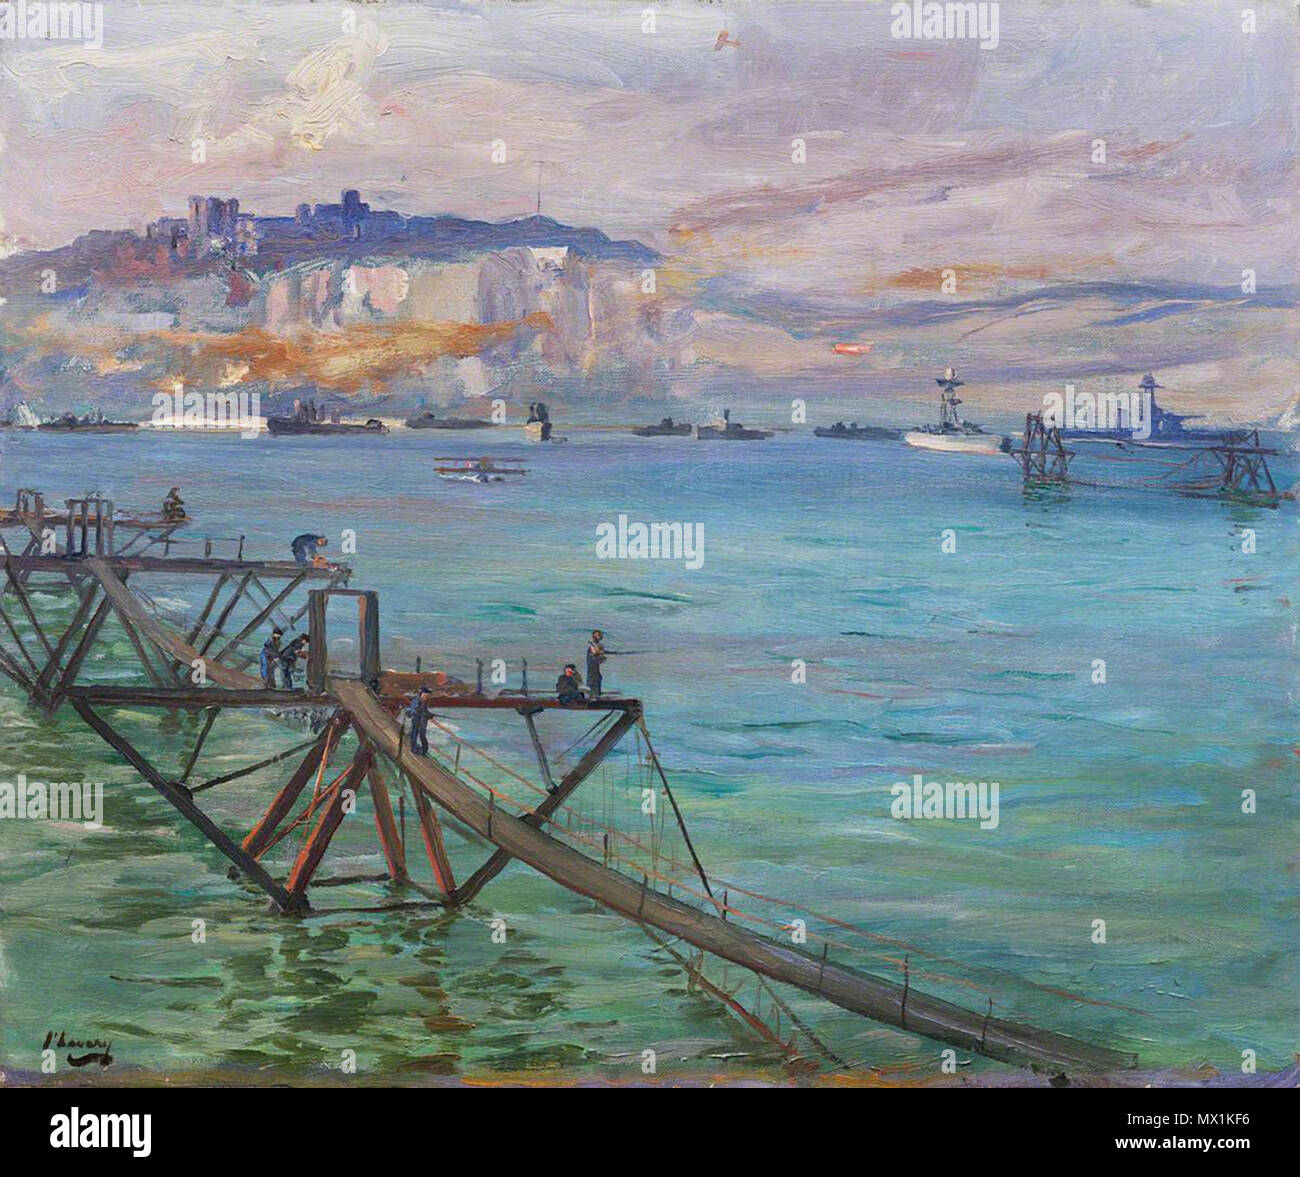 . Джон Лавери (англ. John Lavery) (1856—1941) — ирландский художник, мастер портретной и пейзажной живописи. ================== Sir John Lavery RA (20 March 1856 – 10 January 1941) was an Irish painter best known for his portraits and wartime depictions. www.youtube.com/watch?v=yRaCb7czsQI . 2 March 2016, 05:44. Leonid Ll 595 The Entrance, Dover Harbour, 1918- In the Foreground Are the Harbour Protection Nets against Enemy Submarines (37687820525) Stock Photo